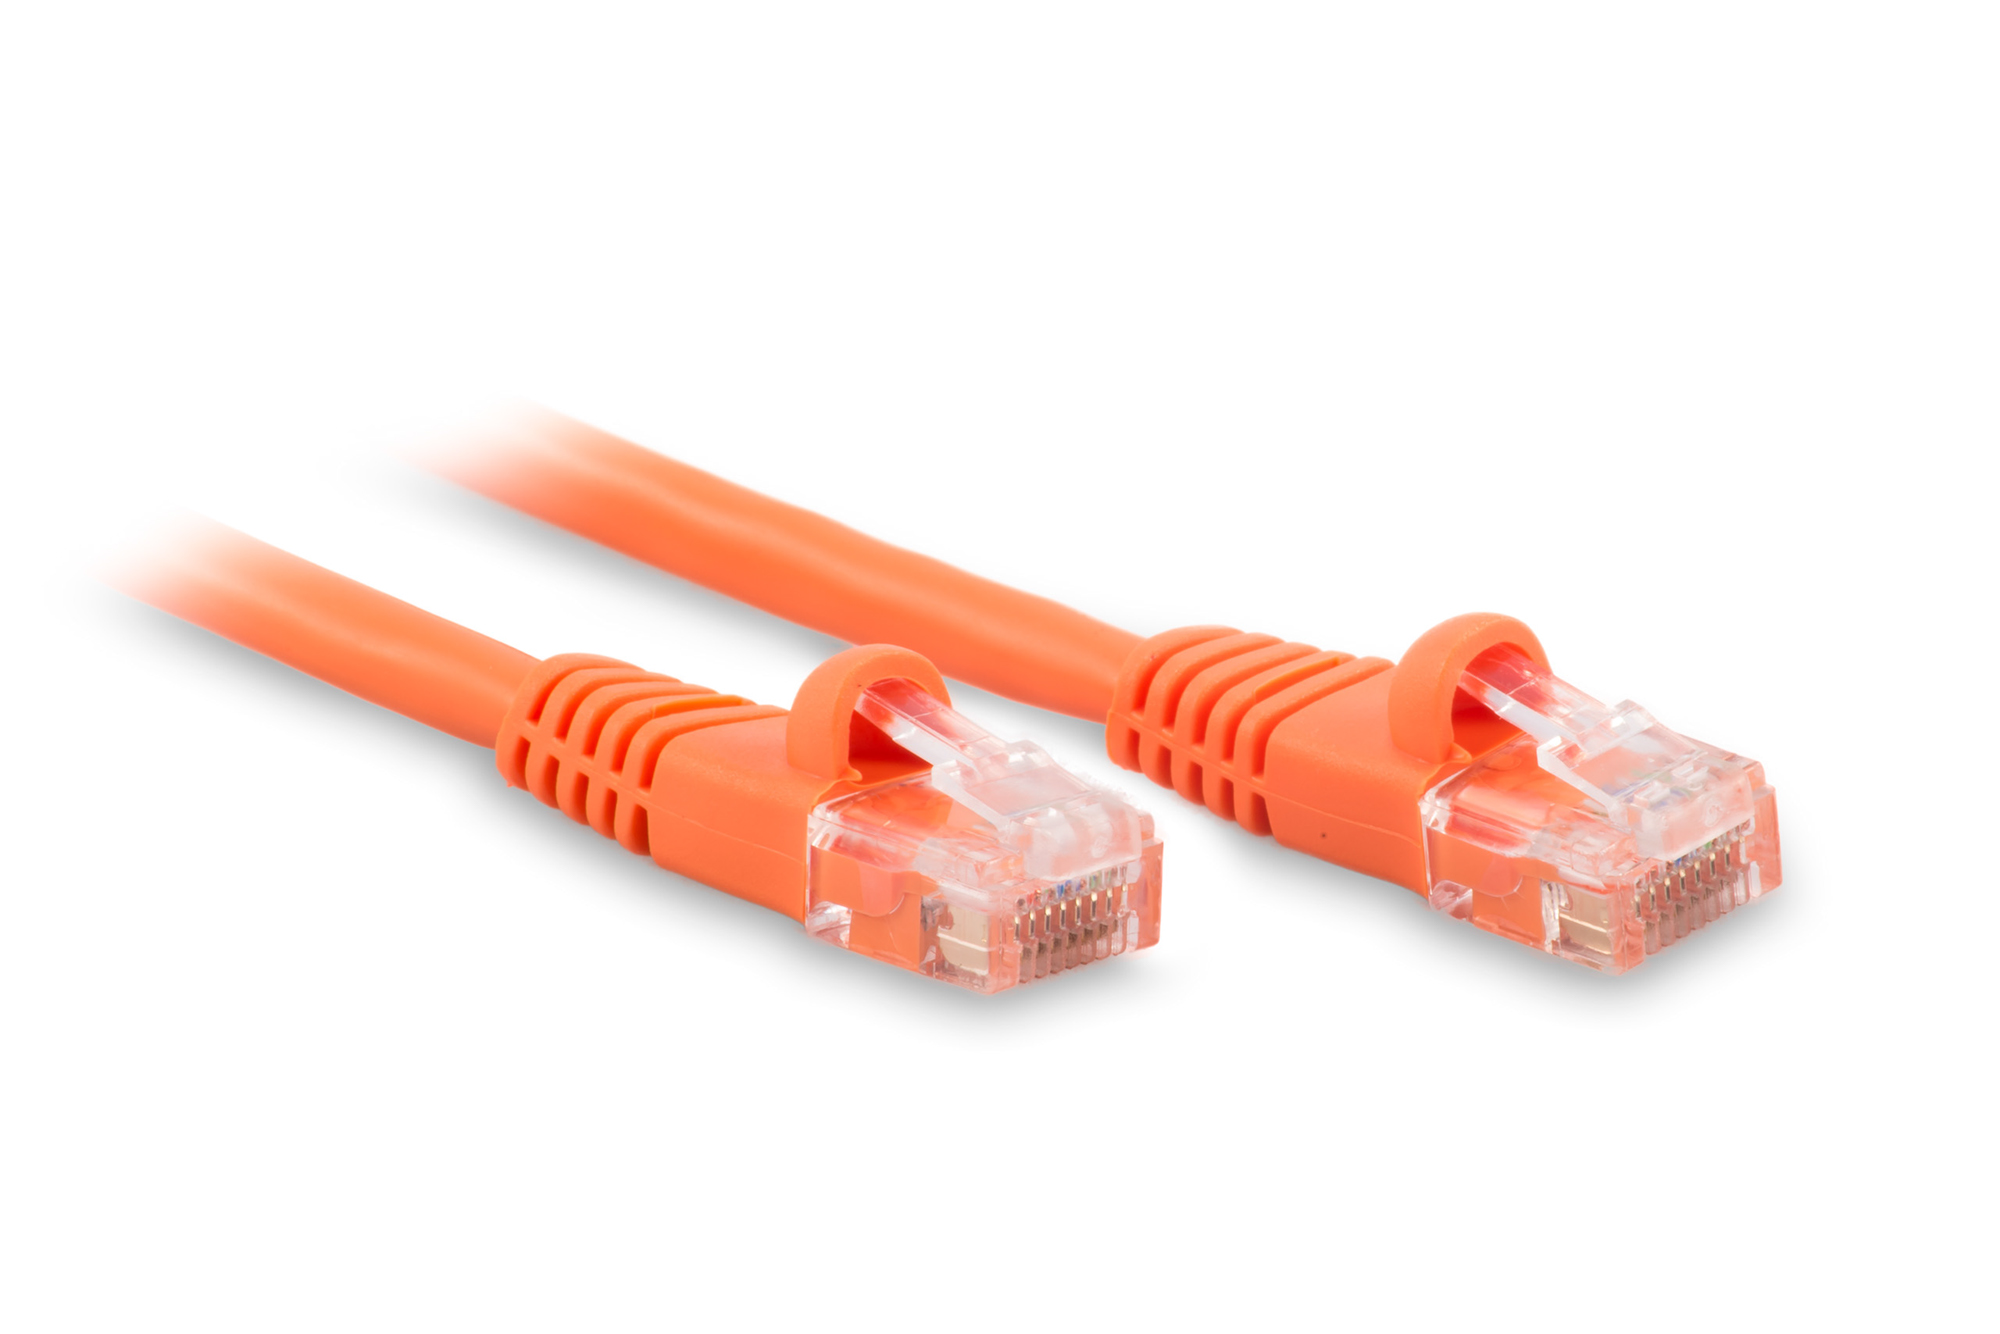 12ft Cat6 Ethernet Patch Cable - Orange Color - Snagless Boot